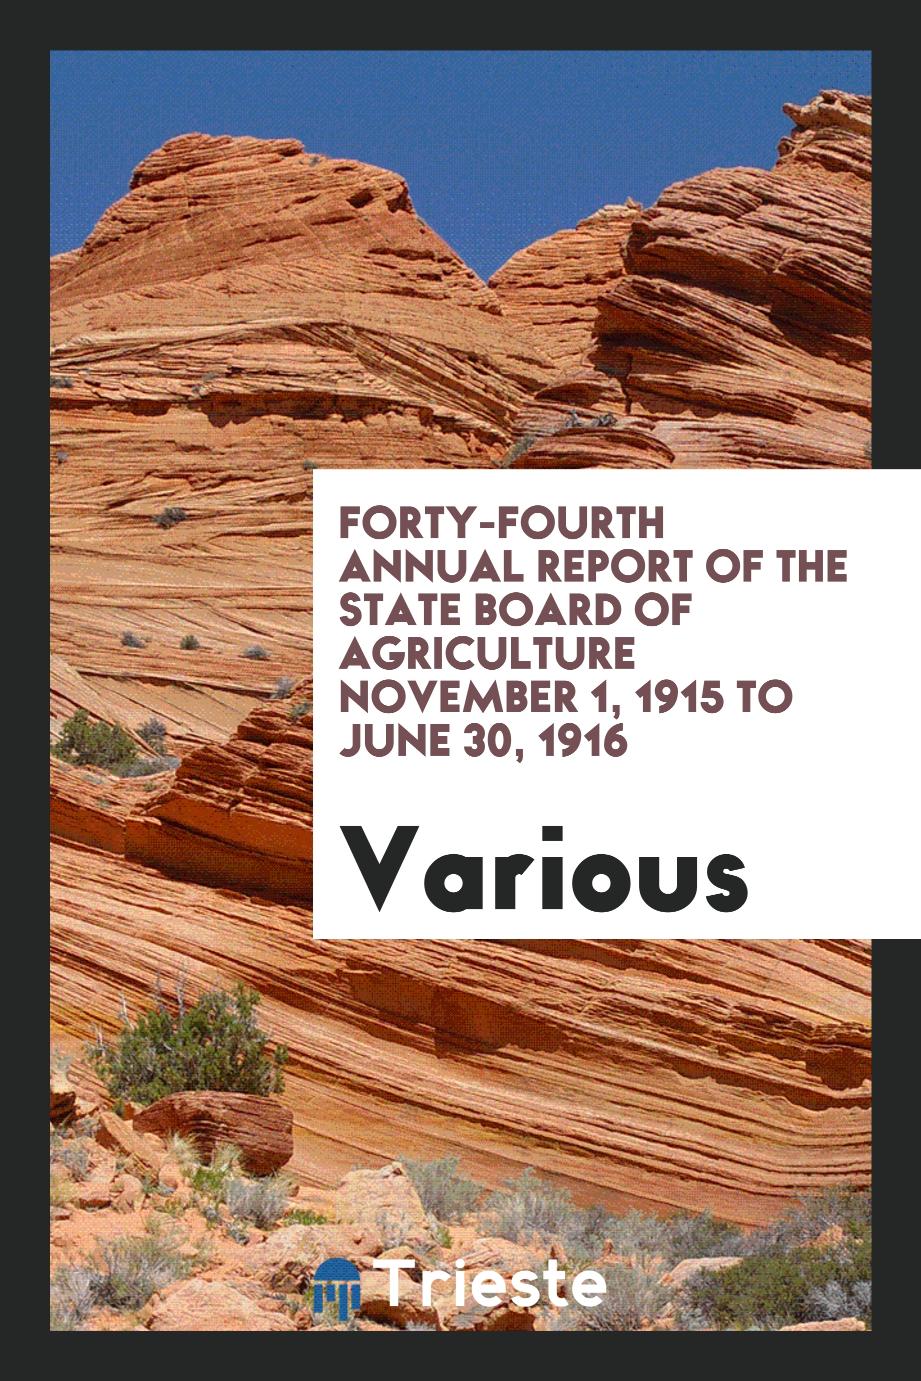 Forty-Fourth Annual Report of the State Board of Agriculture November 1, 1915 to June 30, 1916